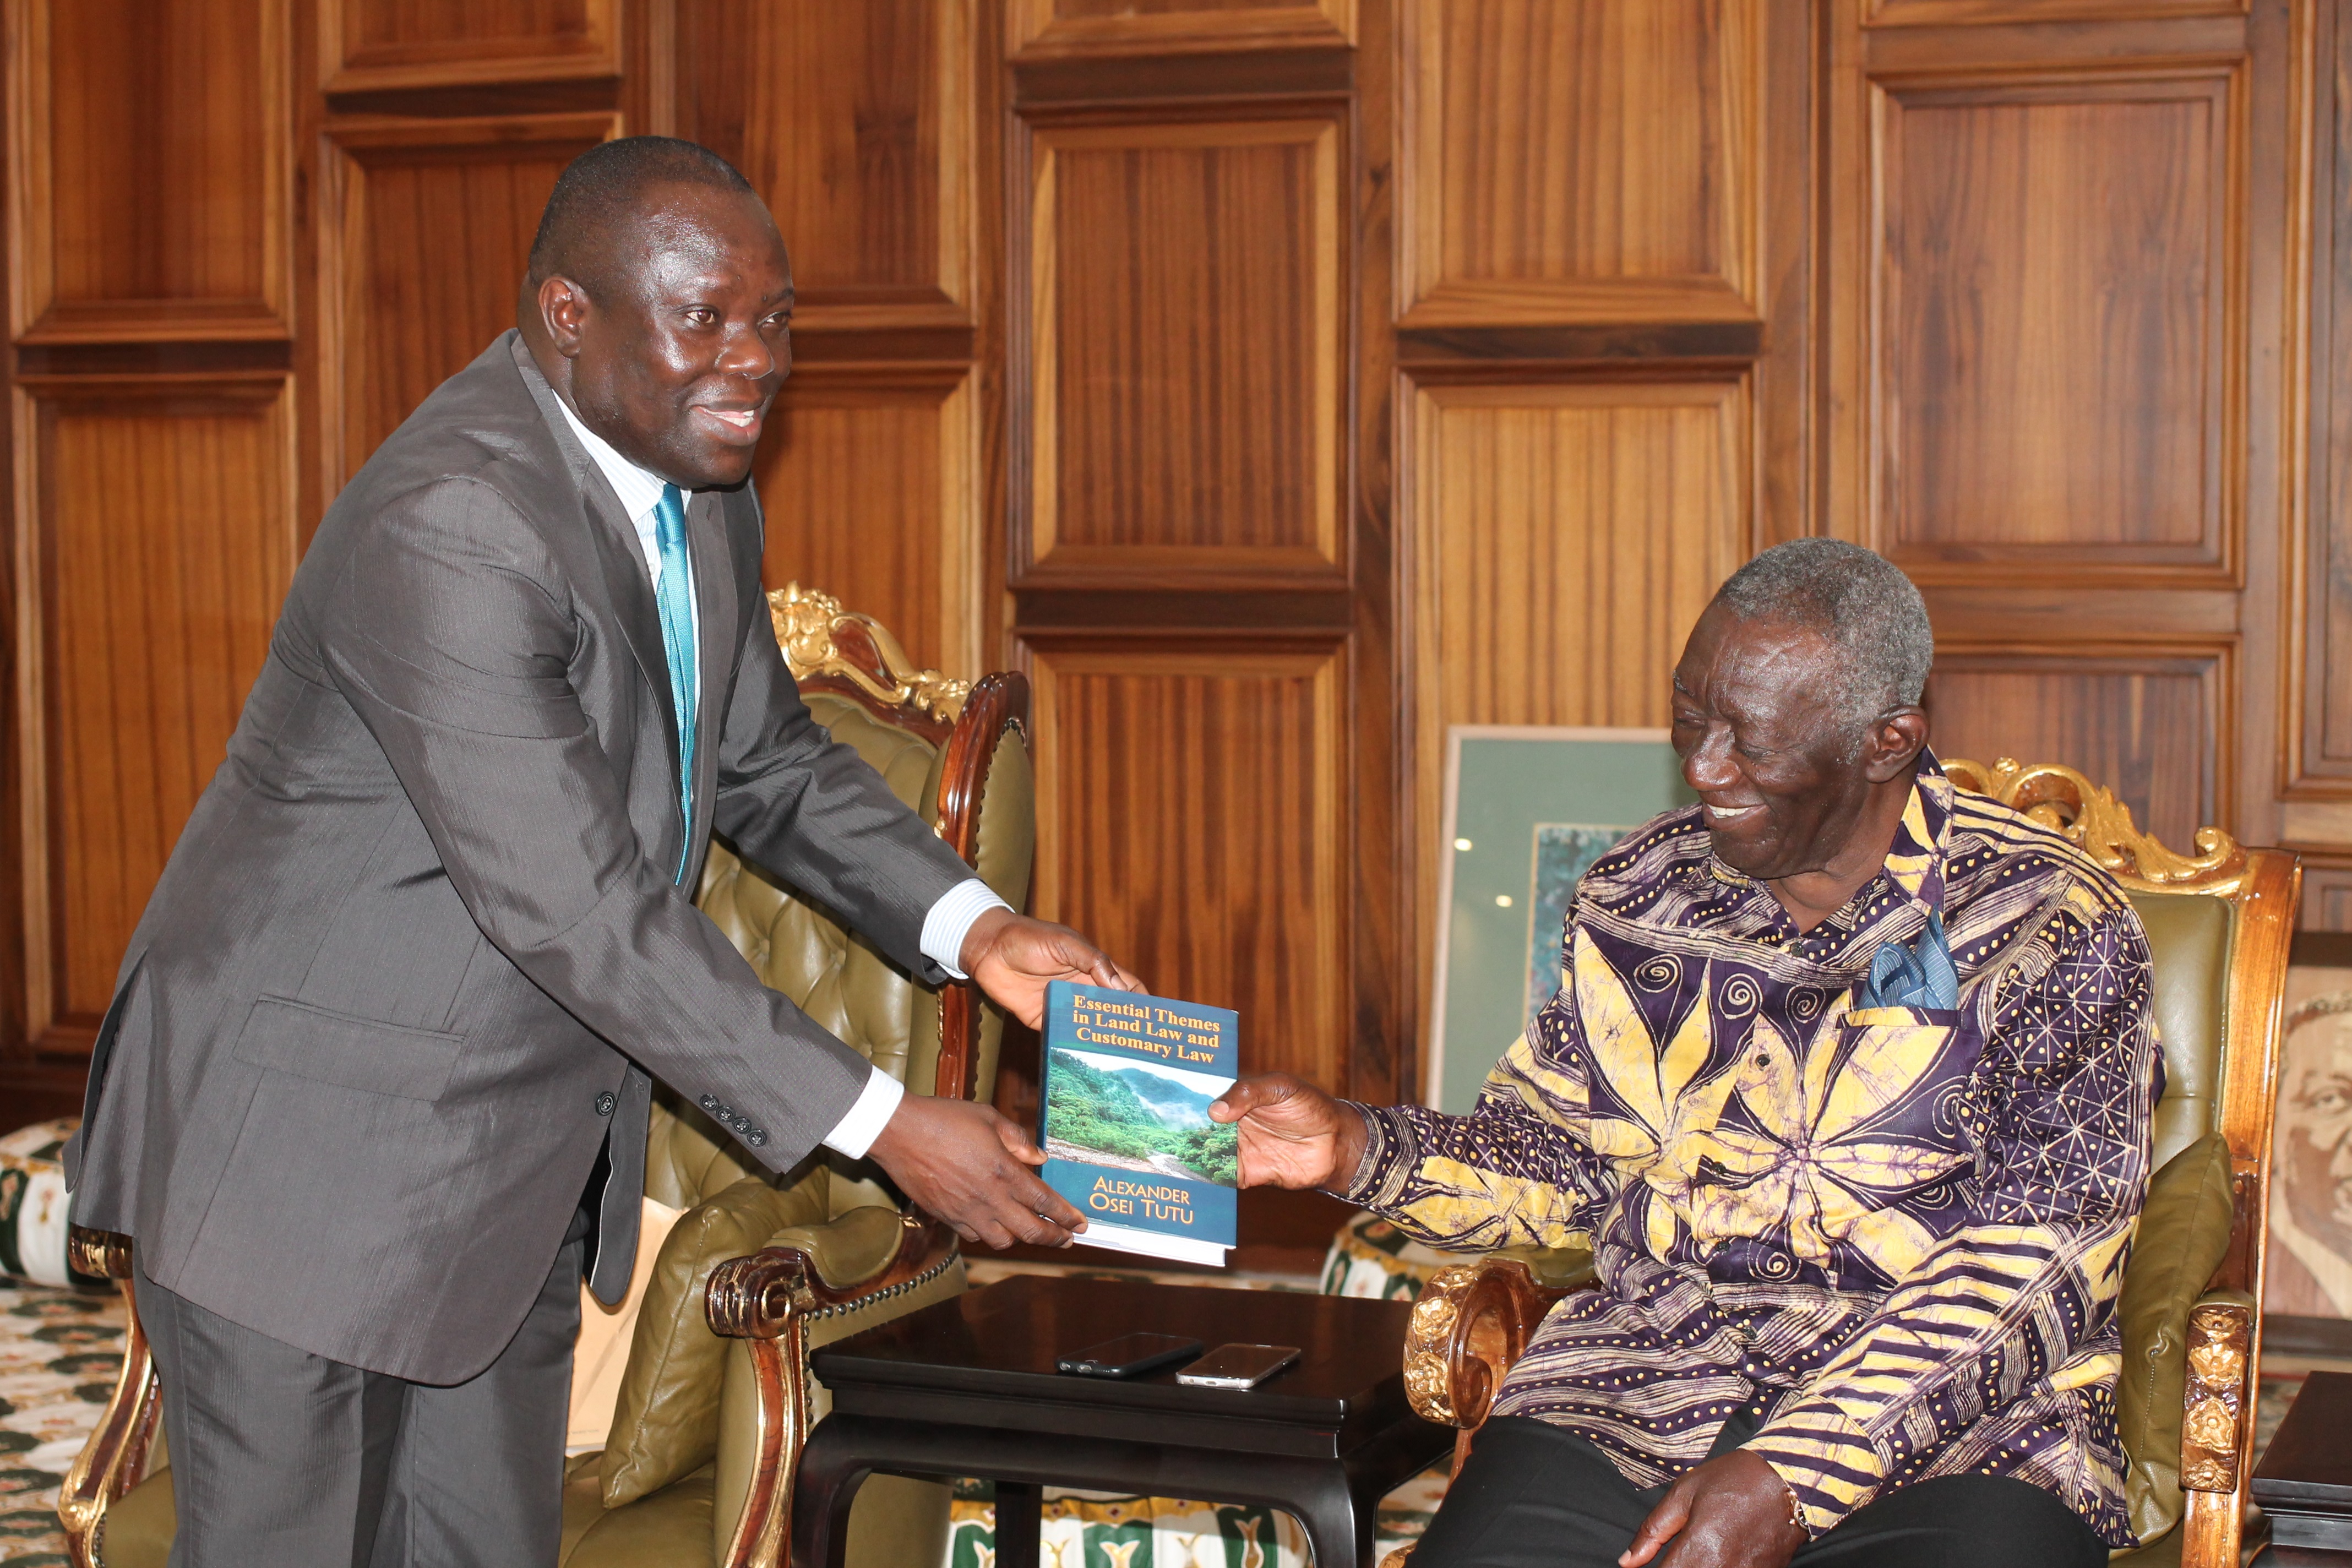 Justice Alexander Osei Tutu (left), Justice of the High Court of Ghana, presenting a copy of his book to former President John Agyekum Kufuor. Picture: MAXWELL OCLOO